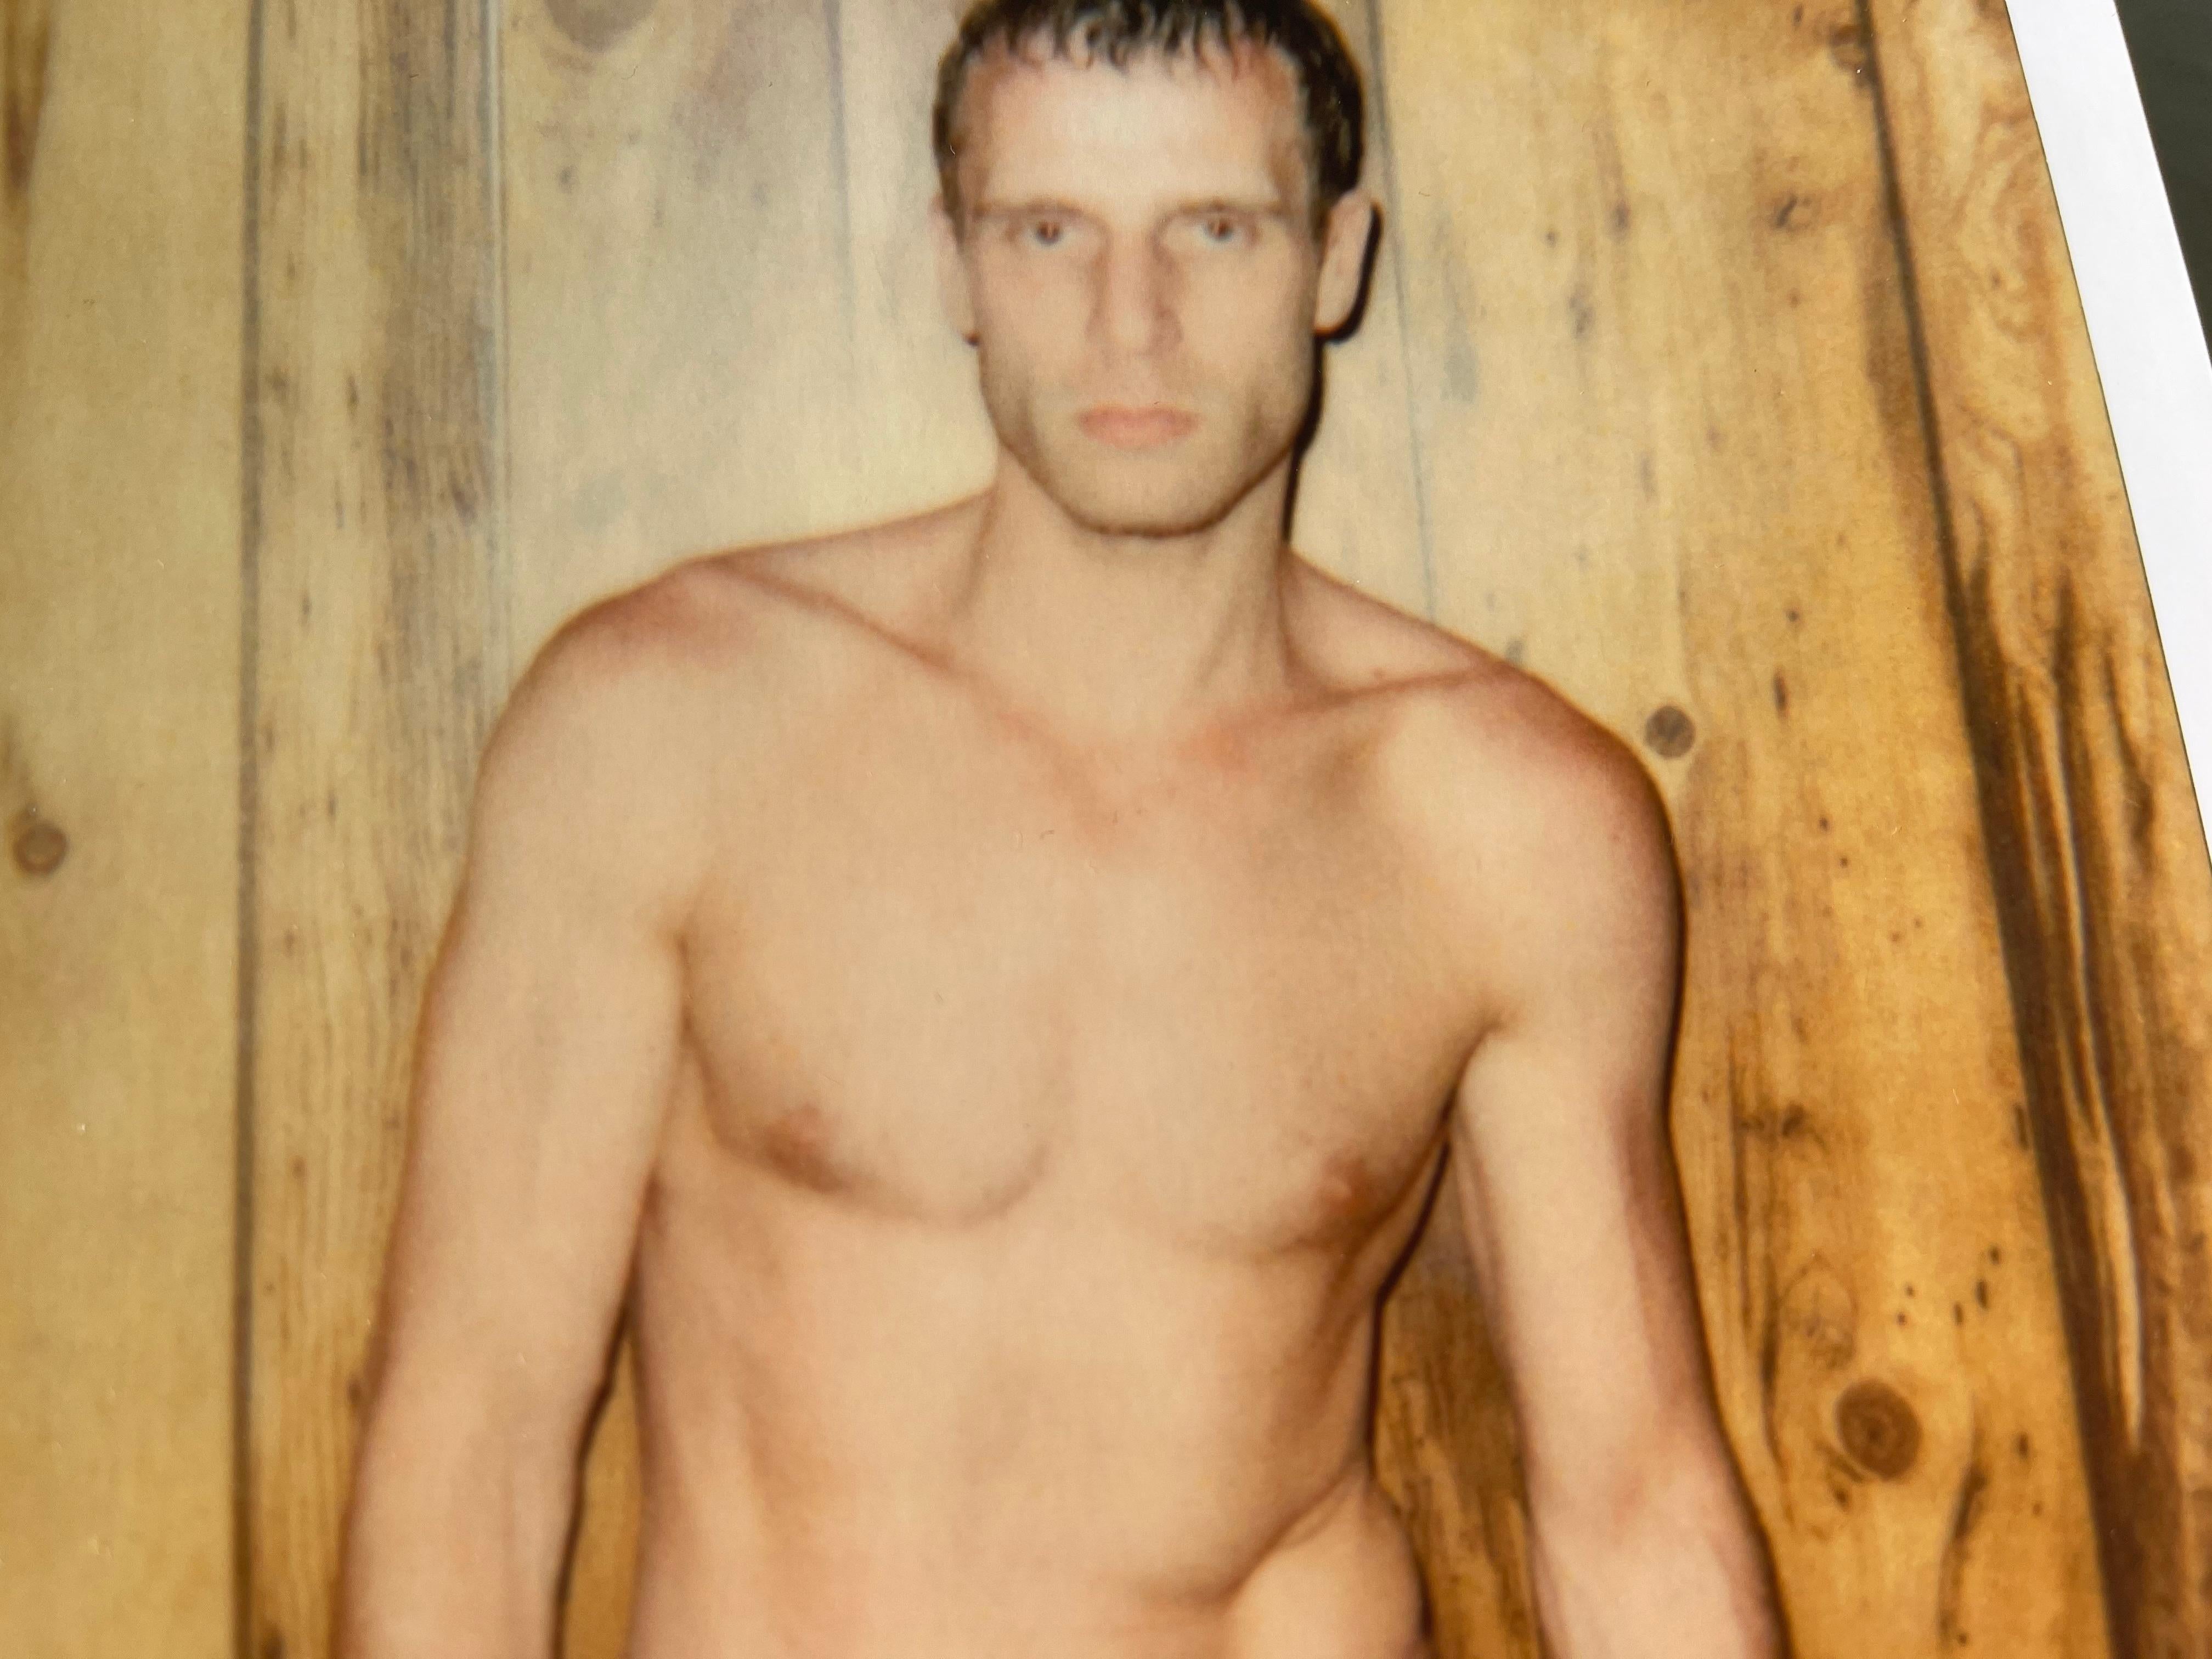 Male Nude (29 Palms, CA) - 1999 

20x20cm, 
Edition 4/10. 
Archival C-Print, based on the original Polaroid. 
Certificate and Signature label. 
Artist Inventory # 293. 
Not mounted


THE GREATER THE EMPTINESS THE GRANDER THE ART – Stefan